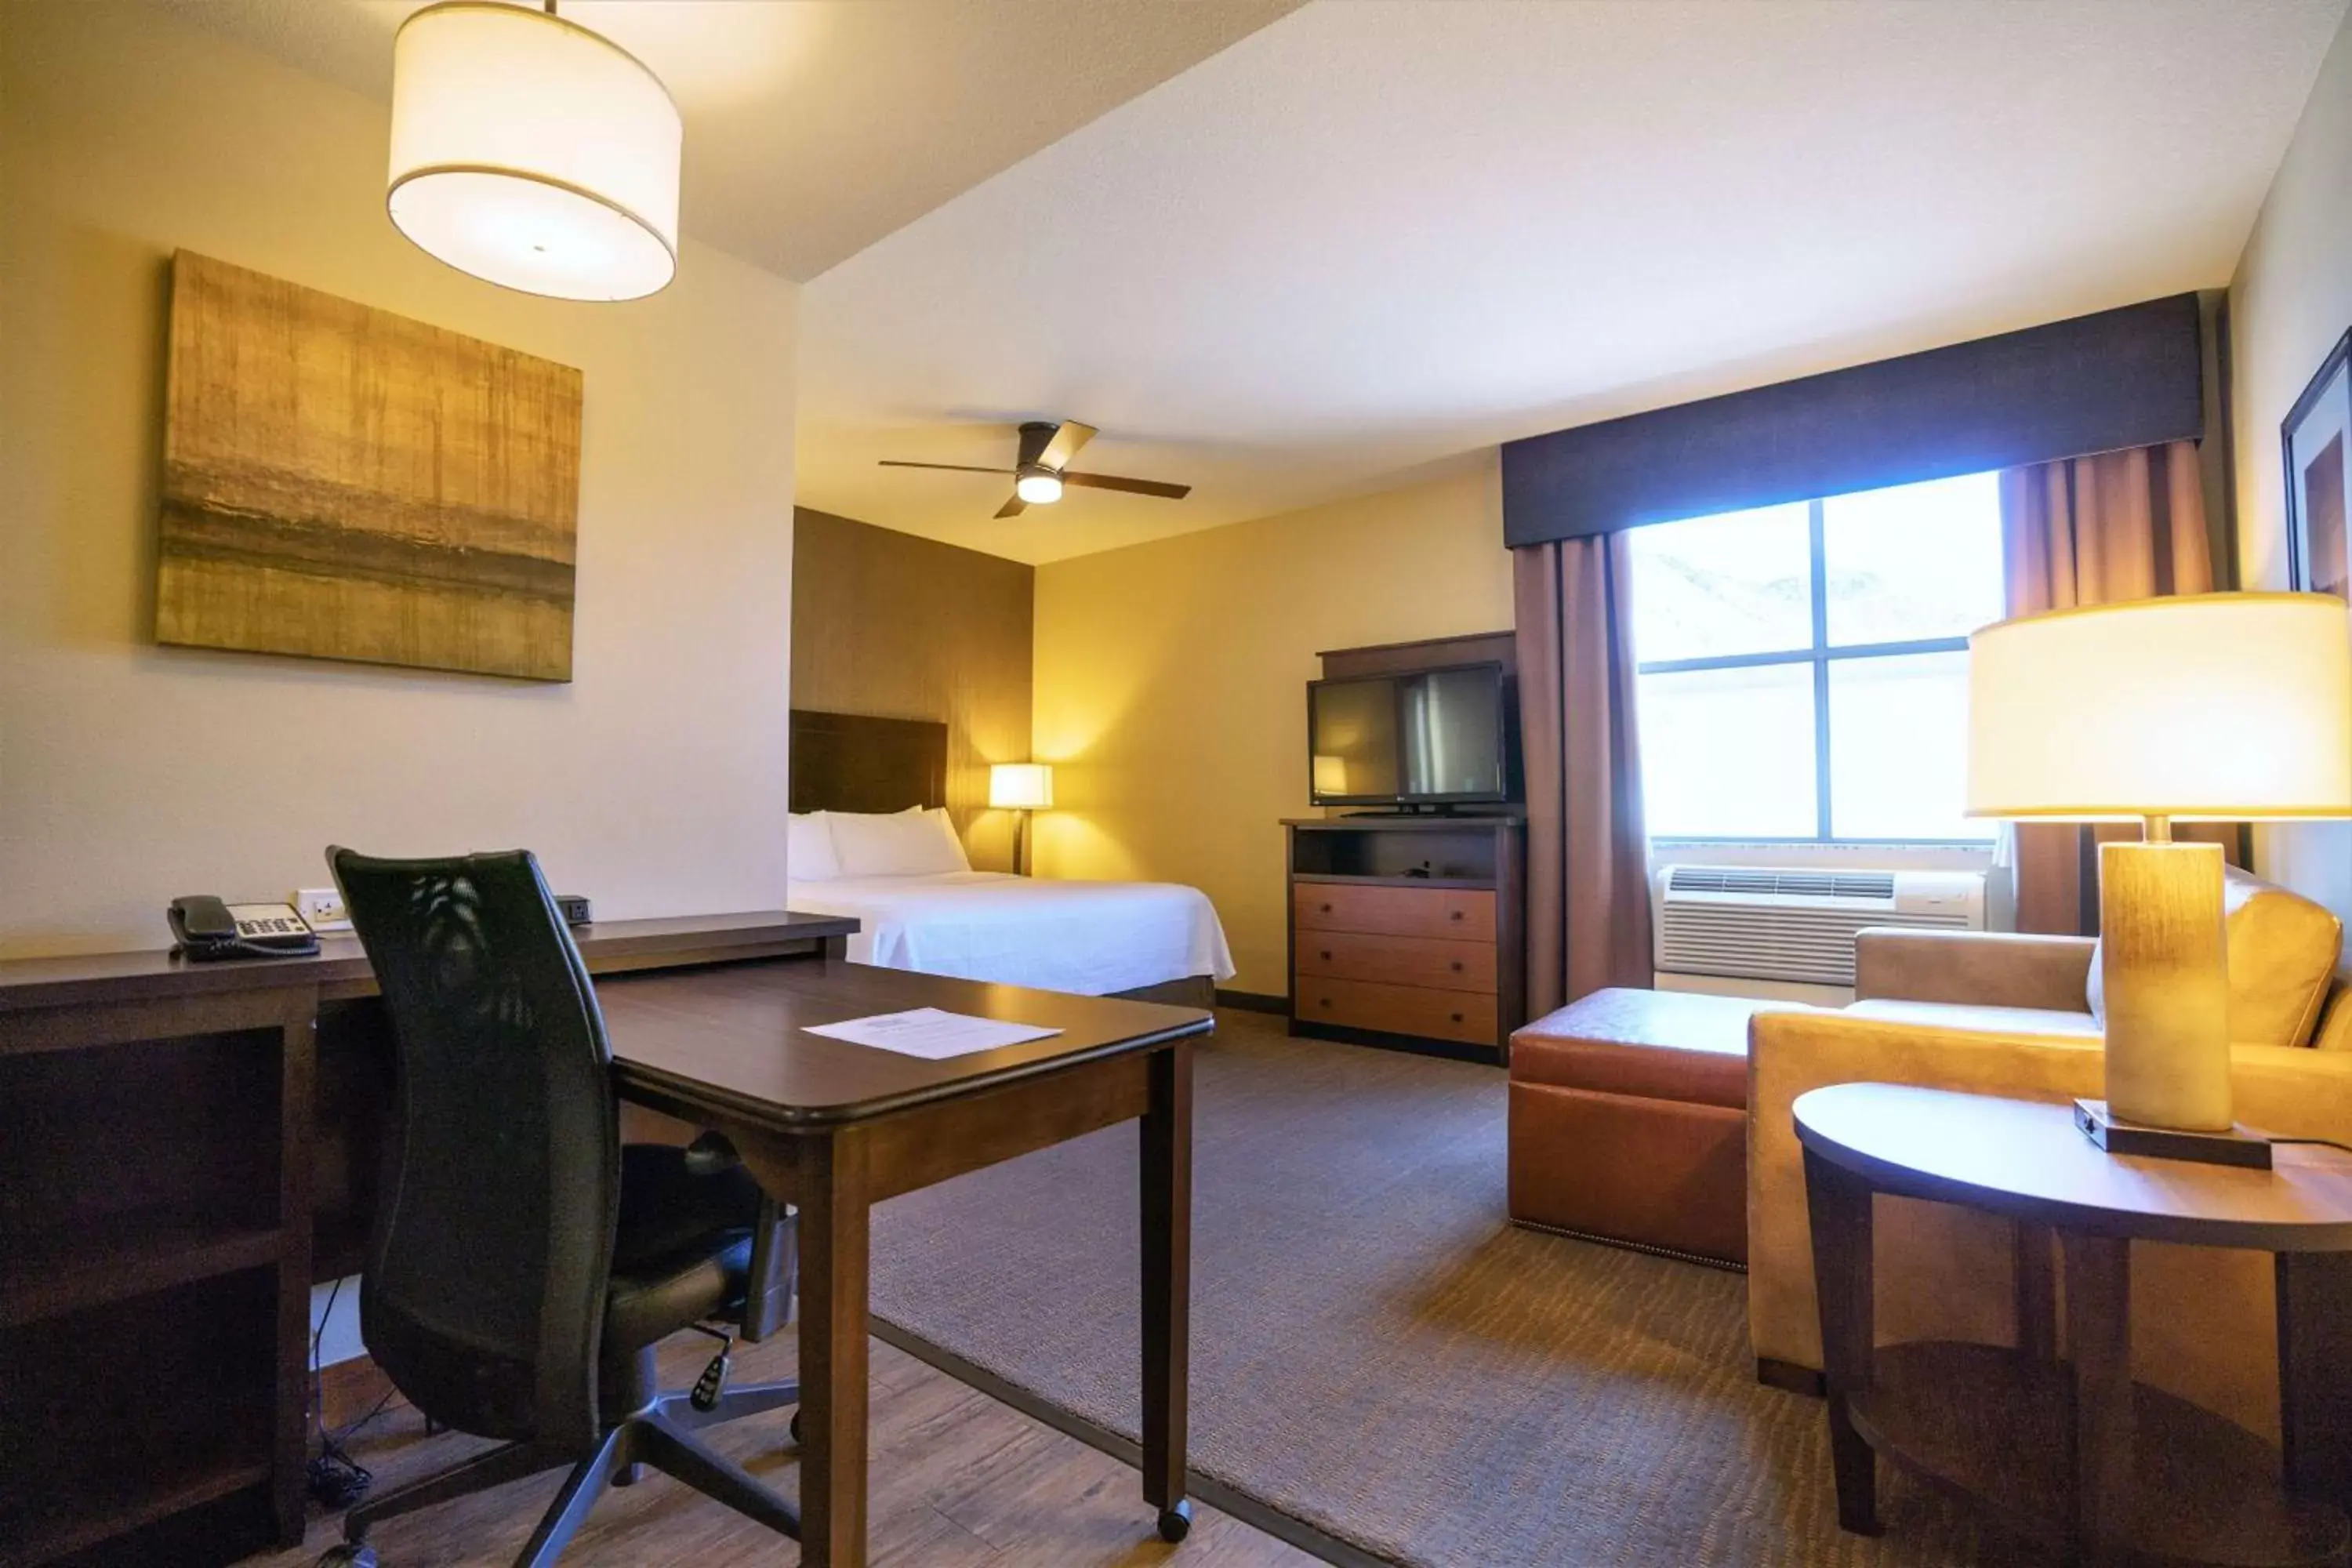 King Studio with Sofa Bed in Homewood Suites by Hilton, Durango